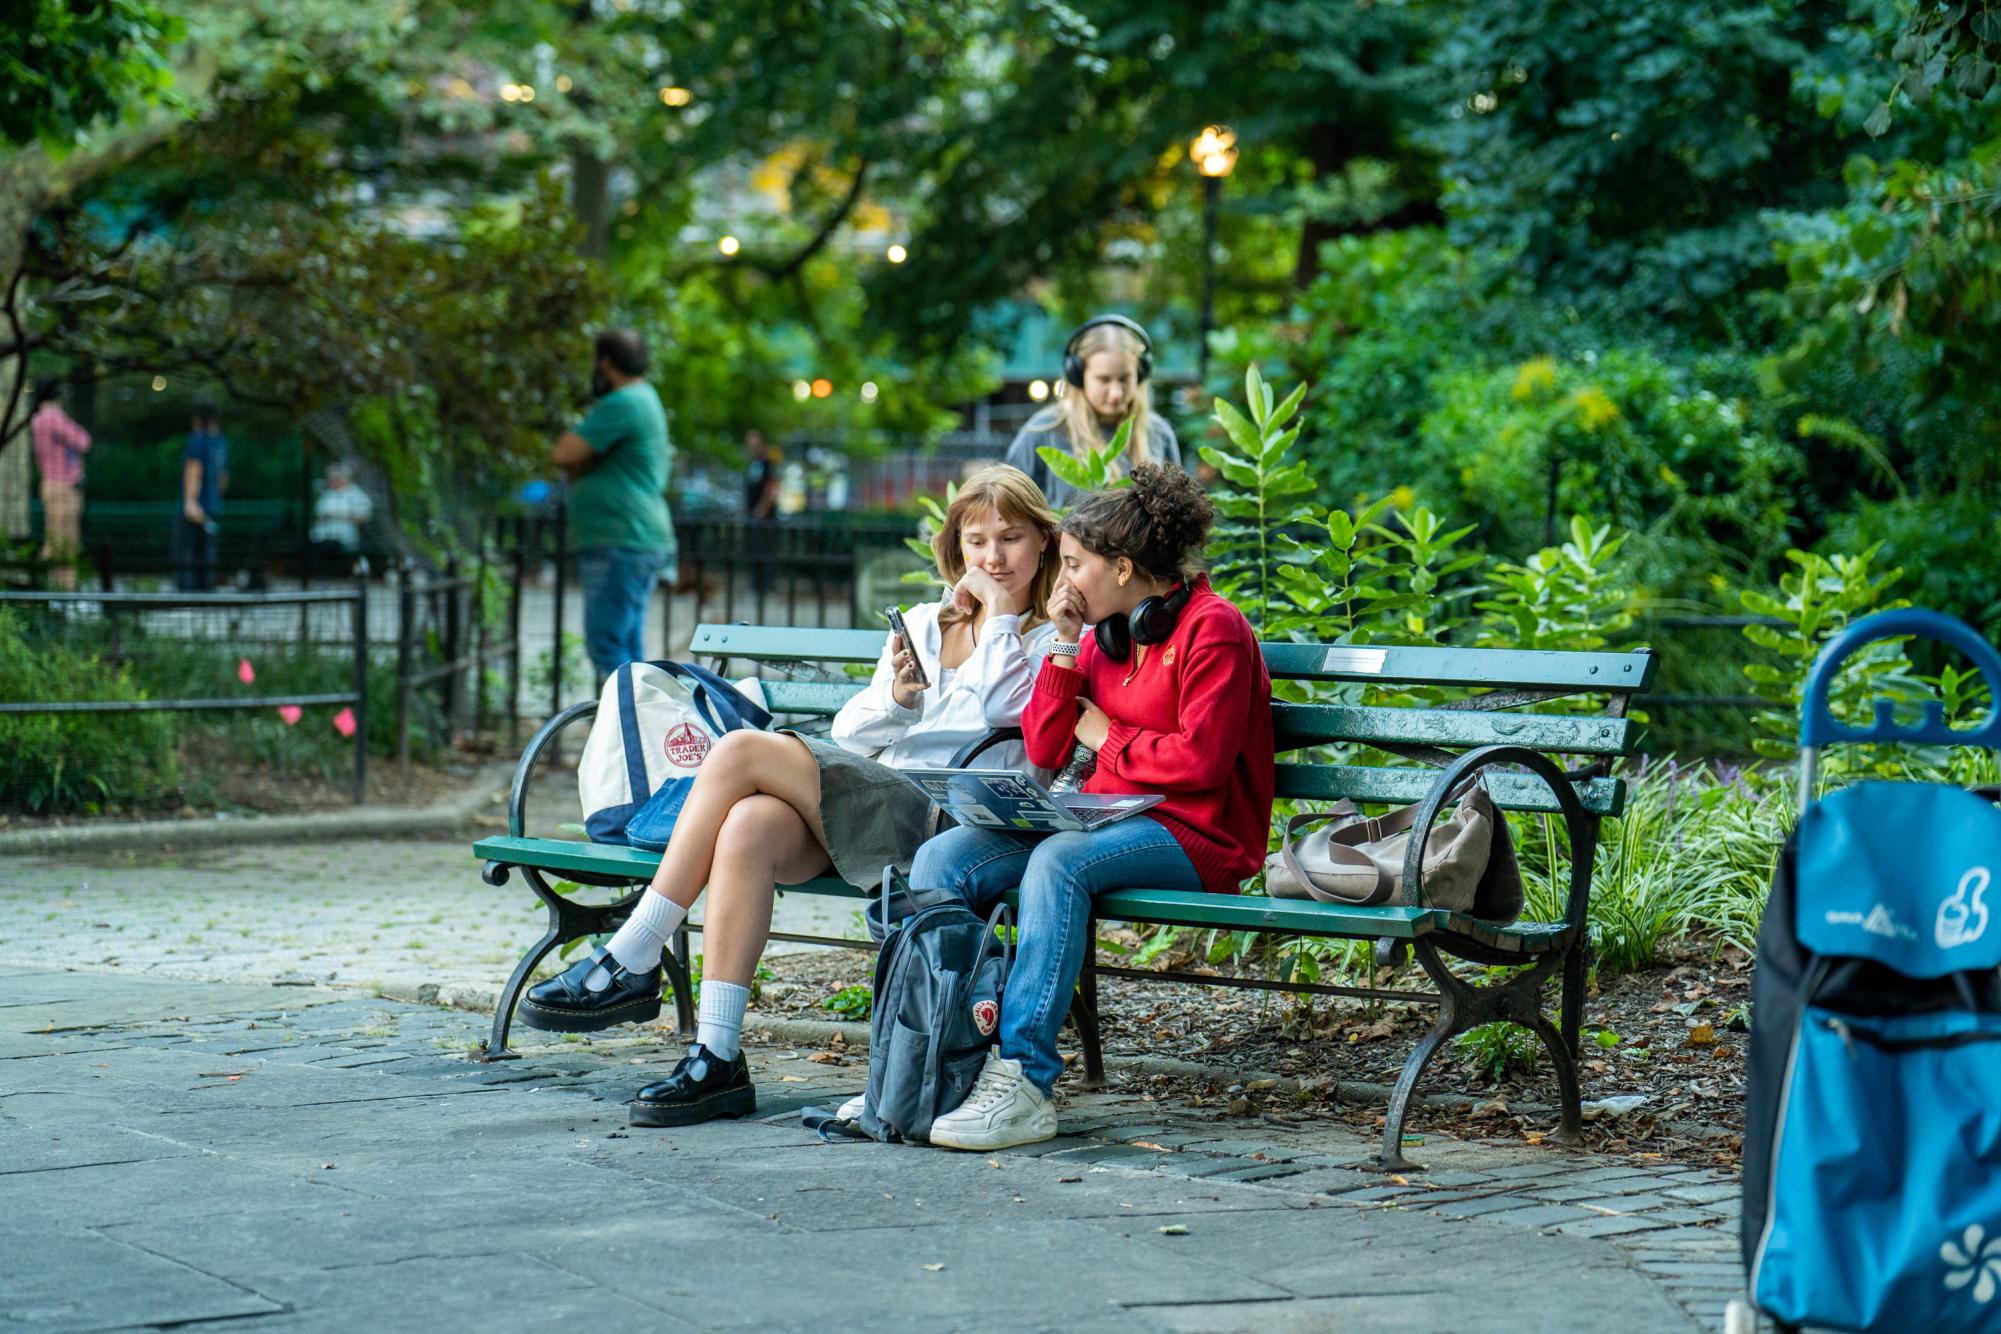 Two people talk on a park bench in Stuyvesant Square Park.